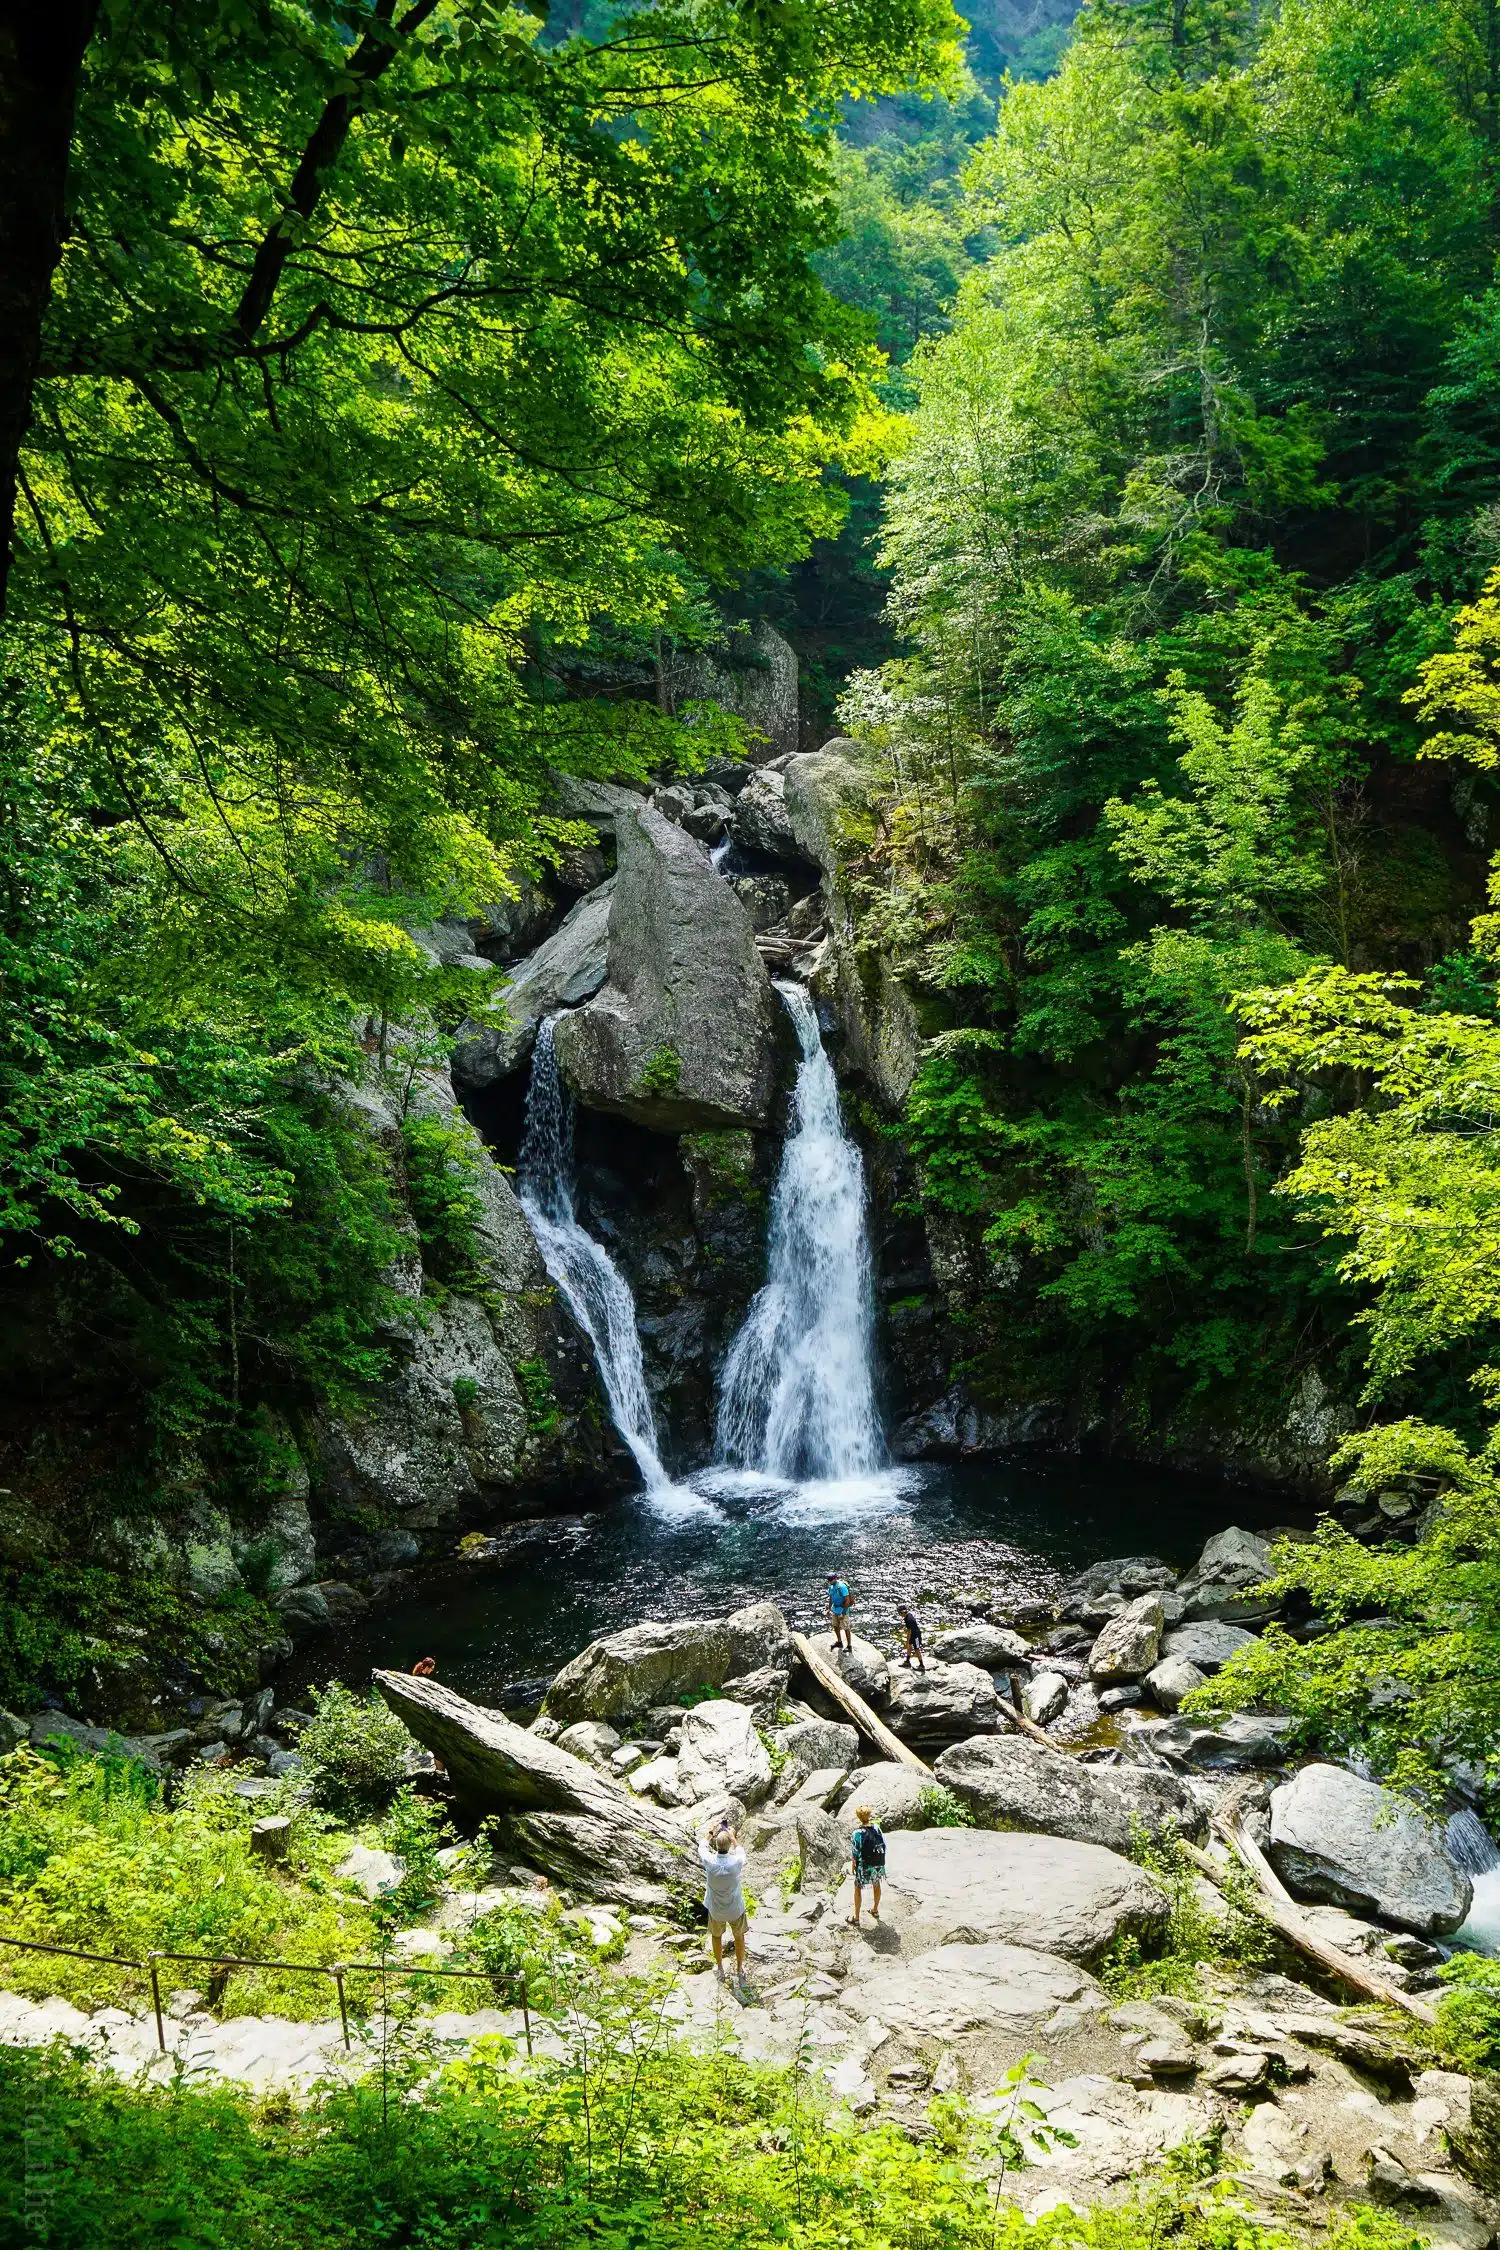 Bash Bish Falls is a great day hike in New England. Advice on hiking the Berkshires, MA side vs. Taconic State Park, NY. Highest waterfall in Massachusetts!